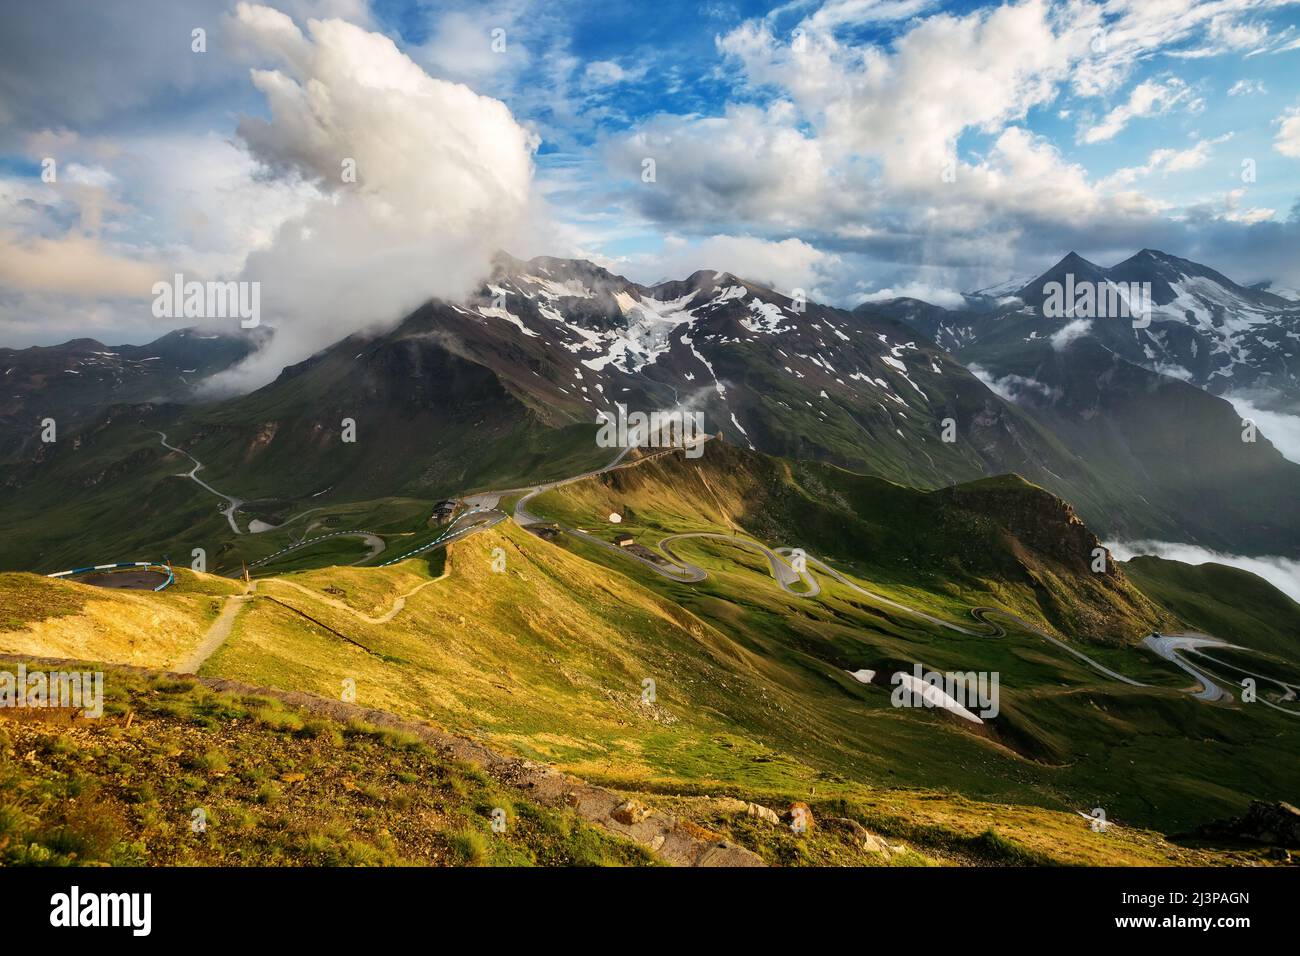 A great view of the green hills glowing by sunlight. Dramatic and picturesque morning scene. Location famous resort Grossglockner High Alpine Road, Au Stock Photo